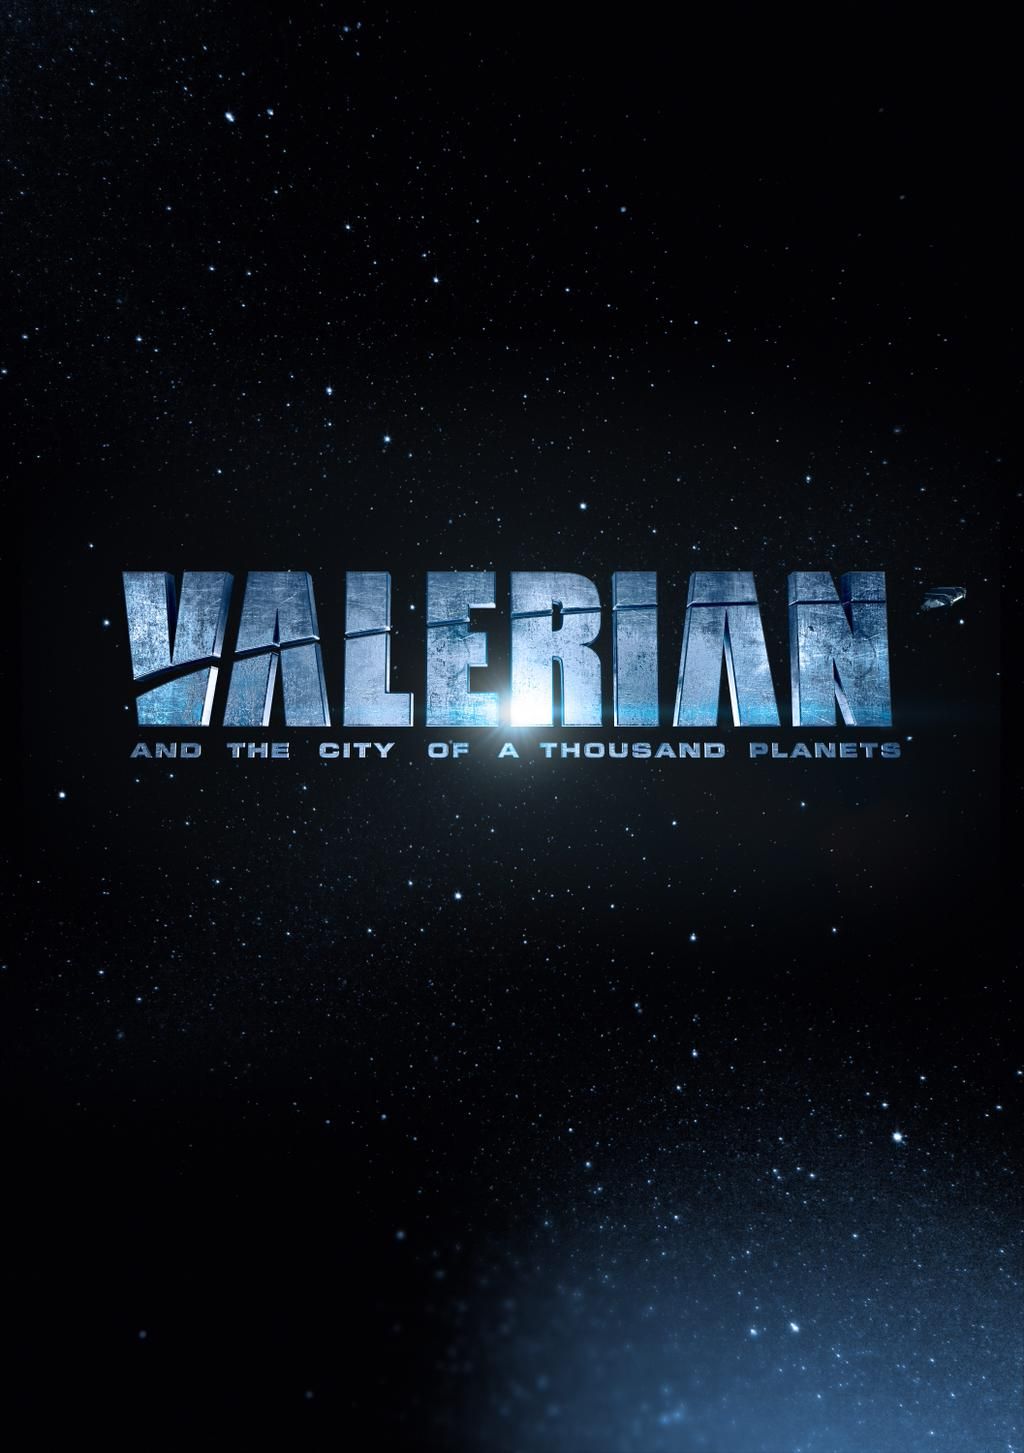 Luc Besson Sci-Fi Comic Adaptation ‘Valerian’ to Star Dane DeHaan and Cara Delevingne